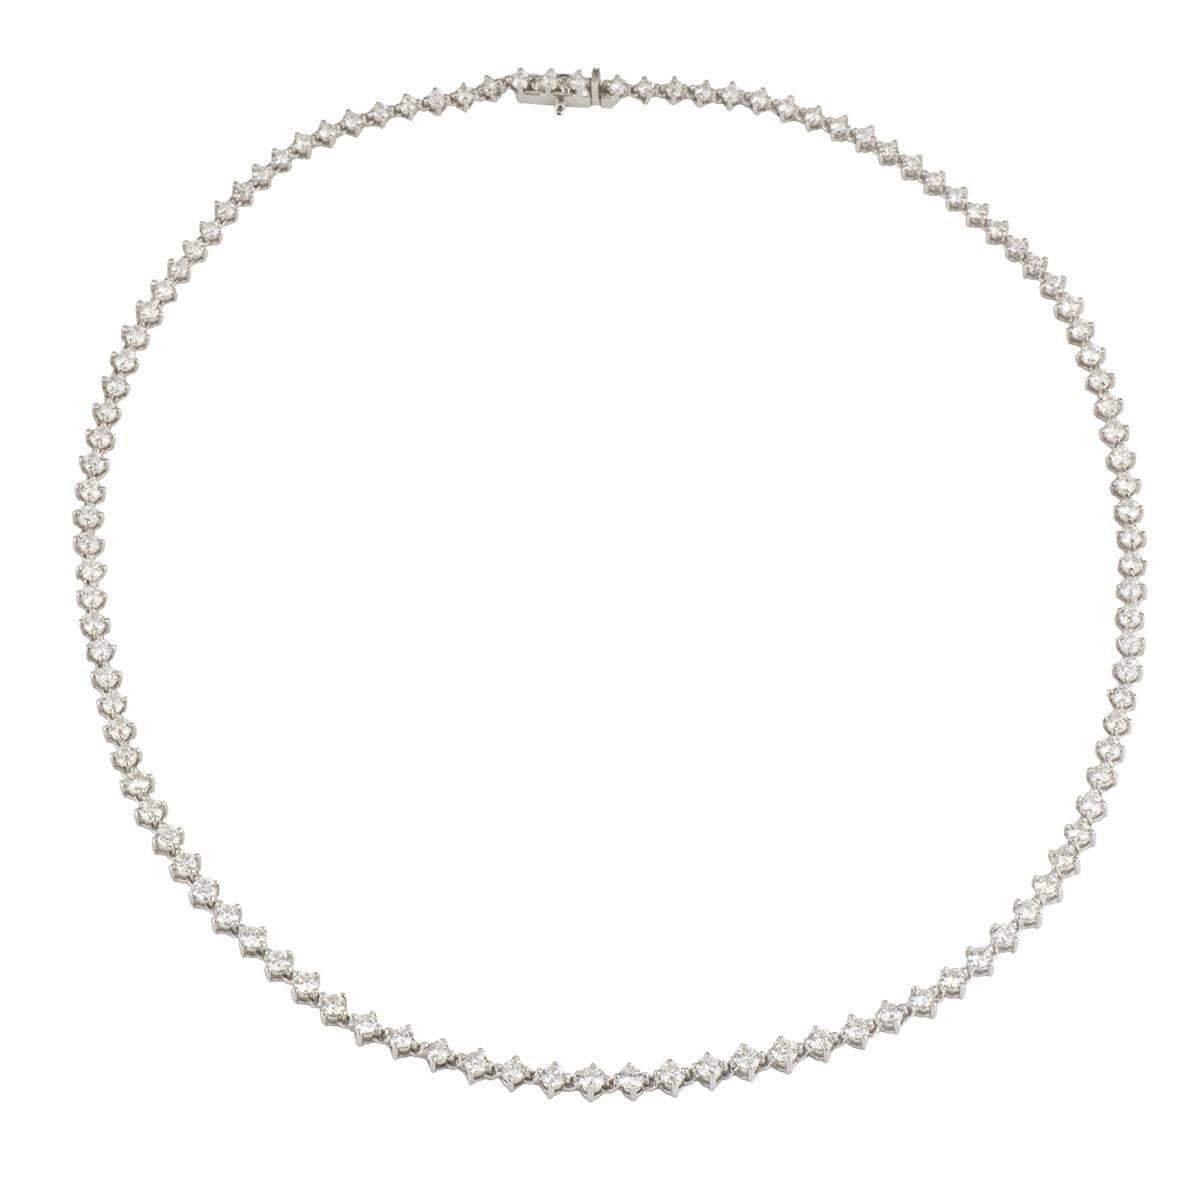 A beautiful 18k white gold full diamond necklace. The necklace has a 109 round brilliant cut diamonds totalling to 7.63ct, G-H colour and VS clarity. The necklace features a box clasp and another lever which crosses over double locking it. The